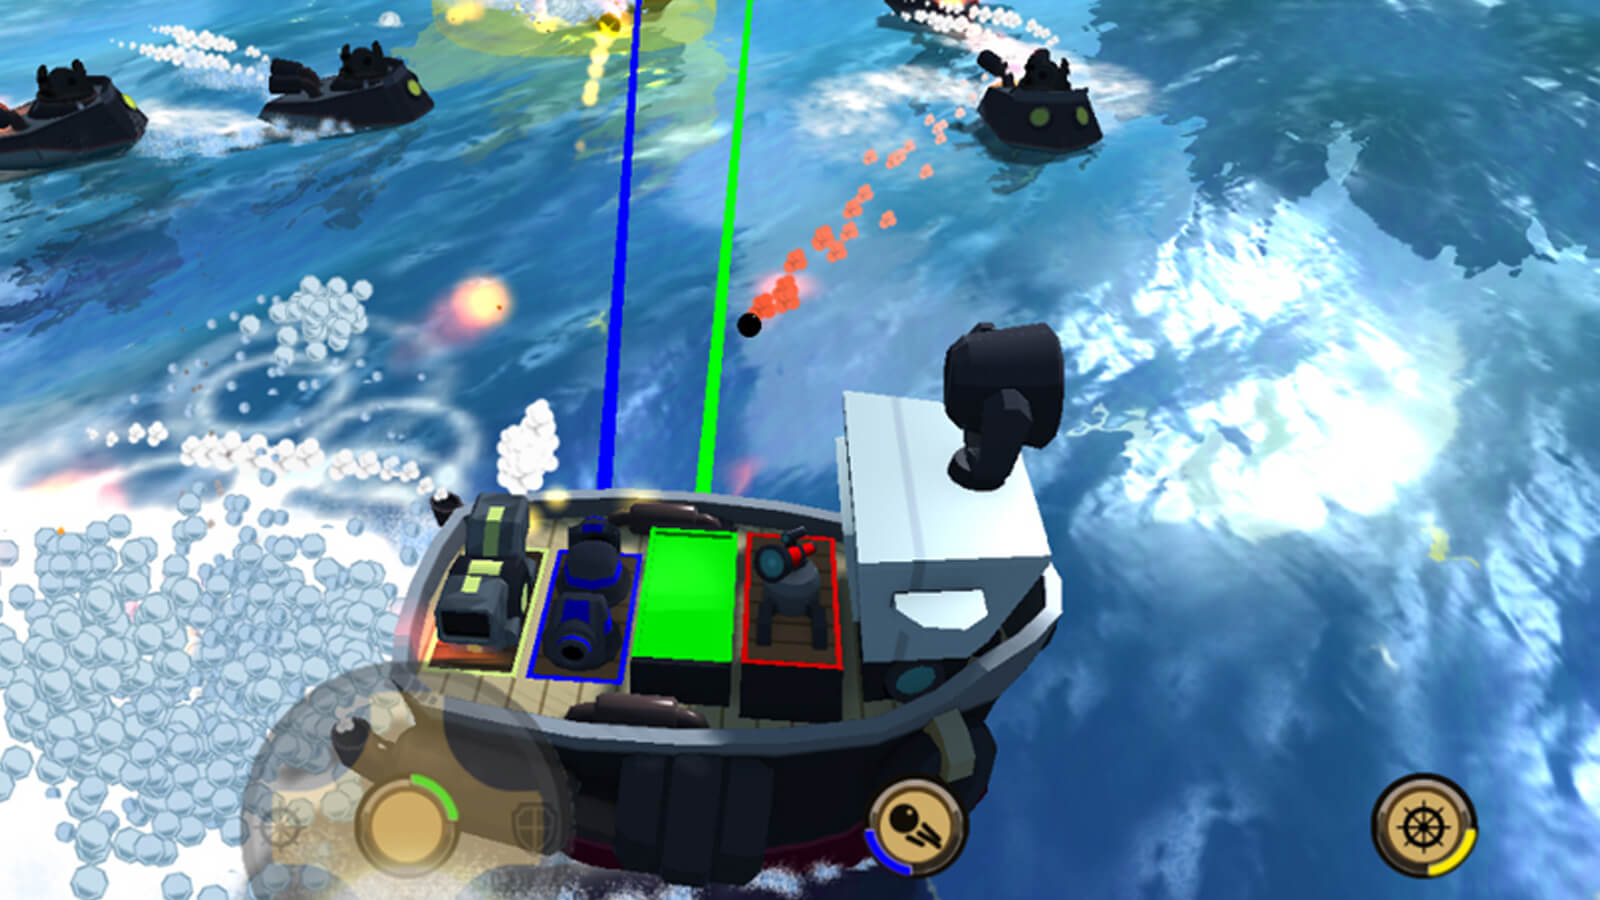 The green and blue players on fire lasers at enemies who are shooting cannon balls at the players' boat